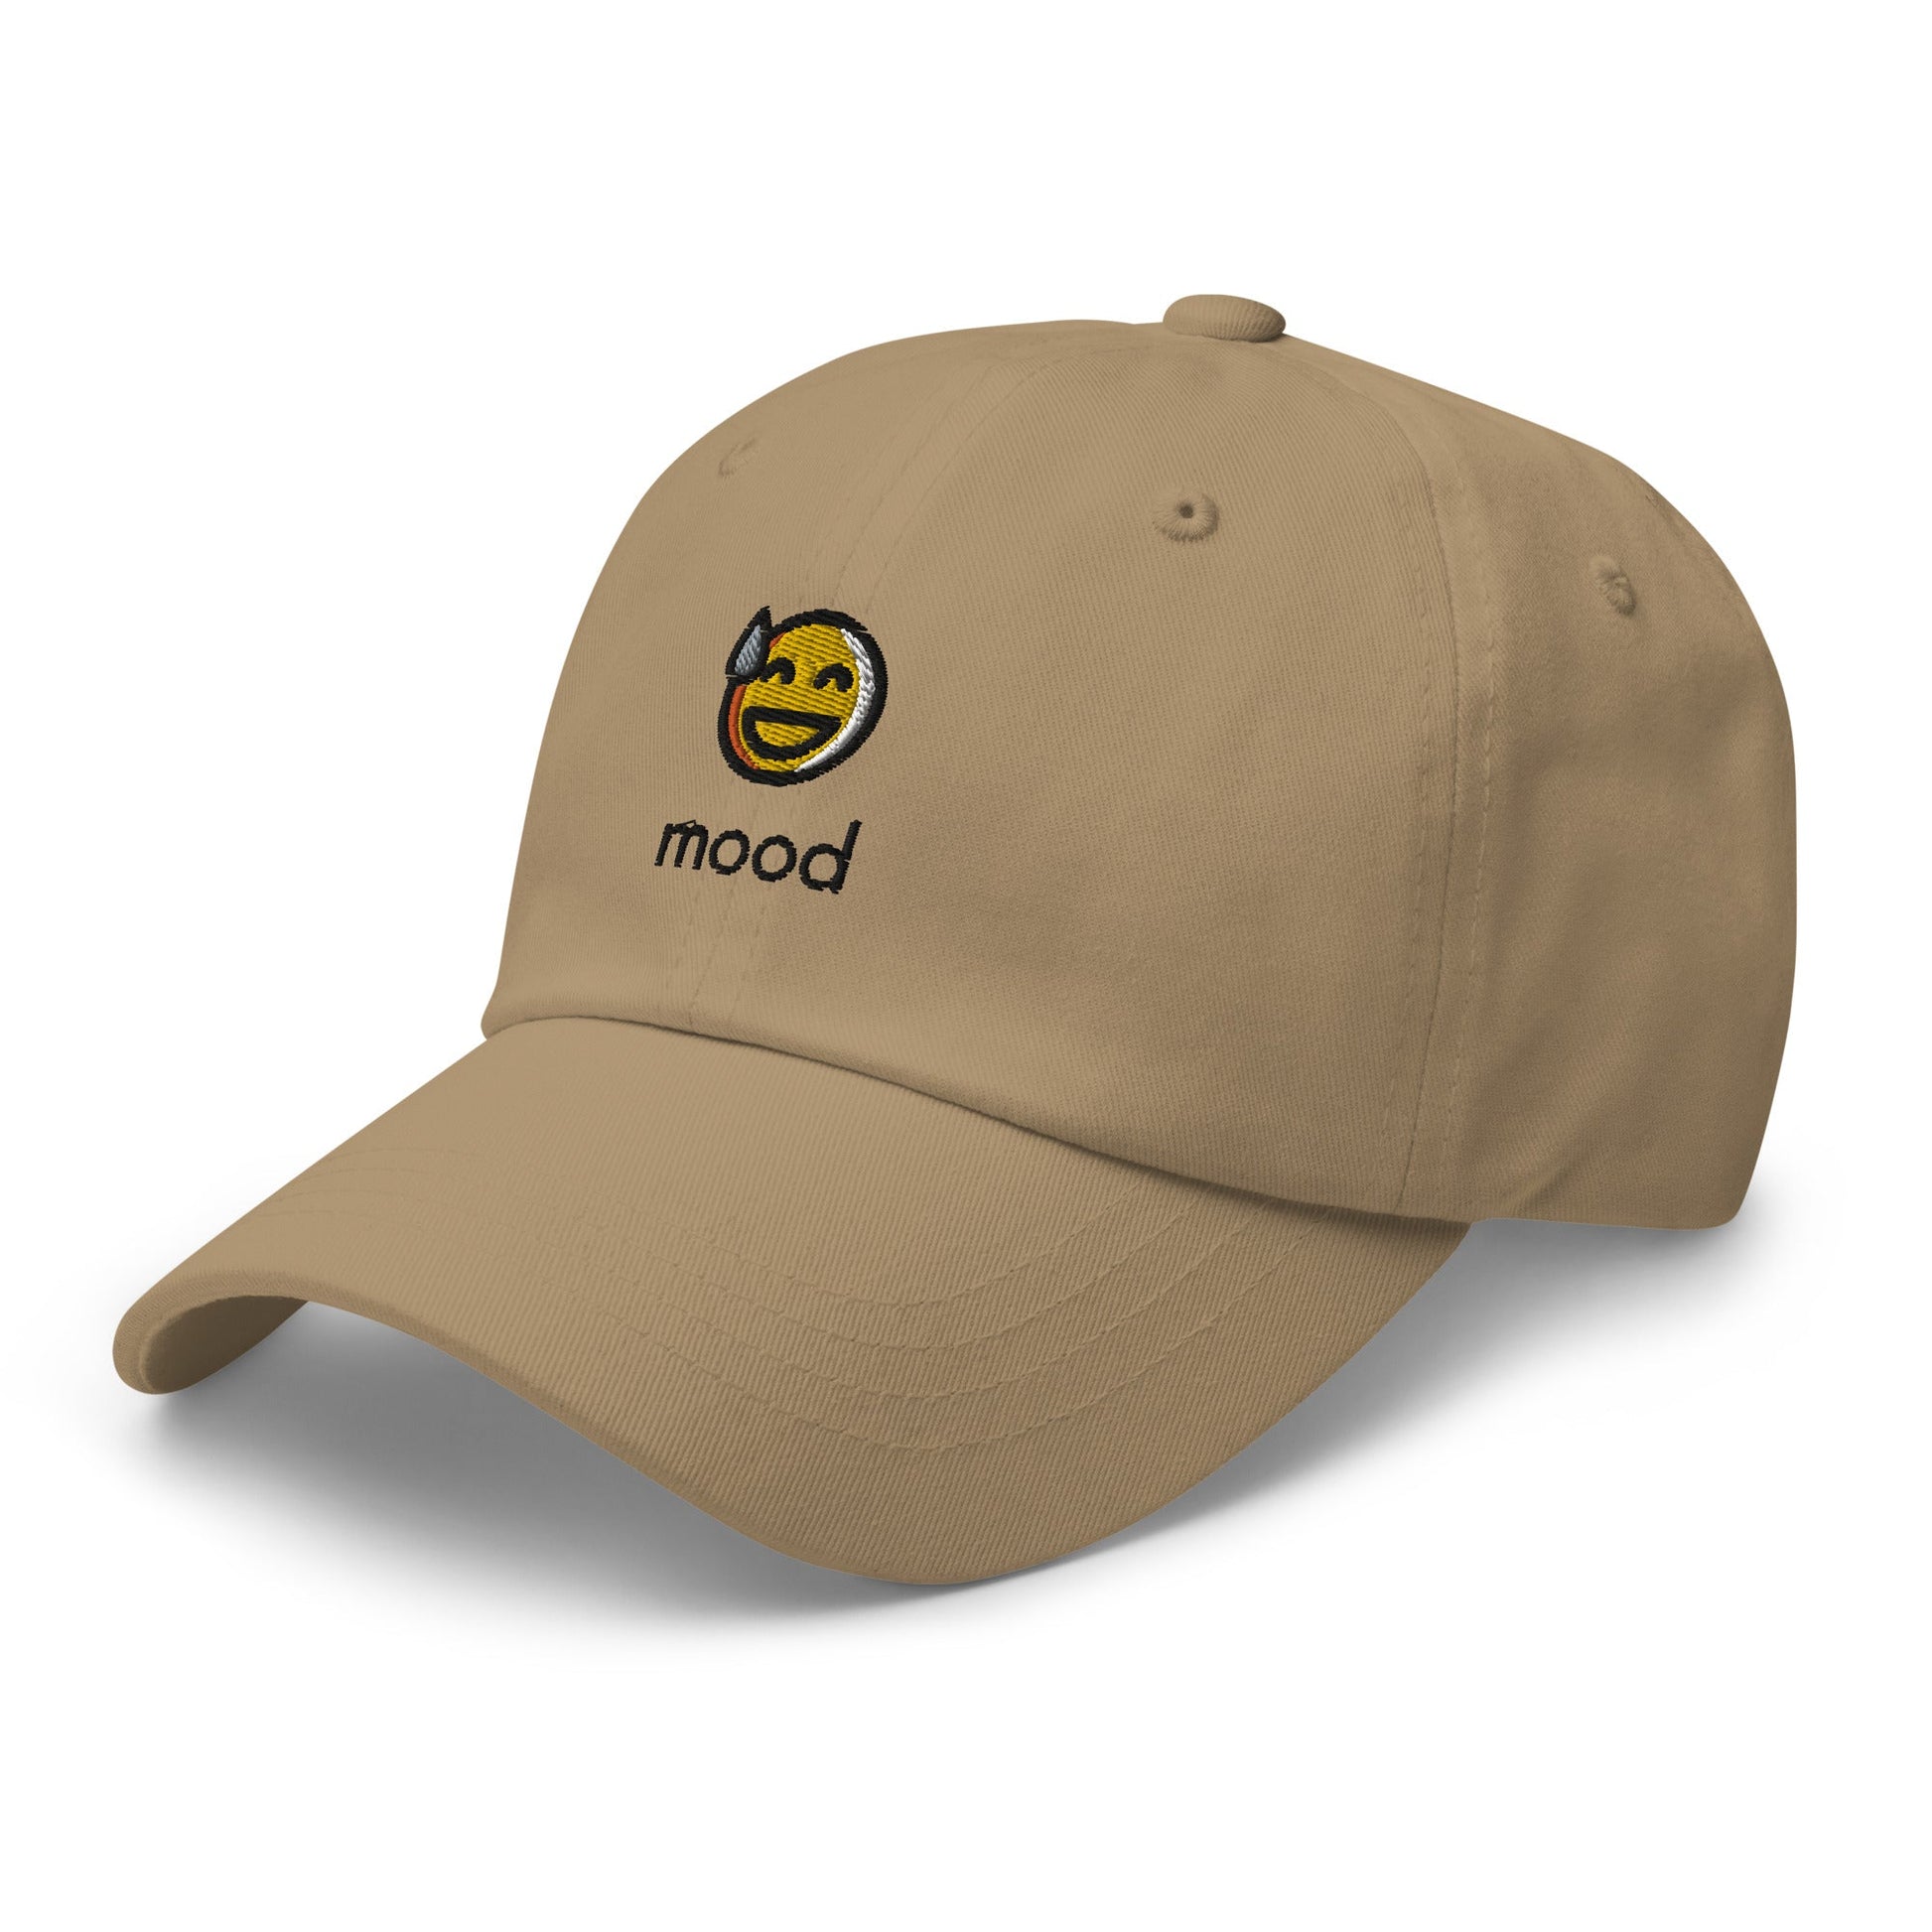 Laughing Mood Embroidered Classic Hat - chucklecouture co.